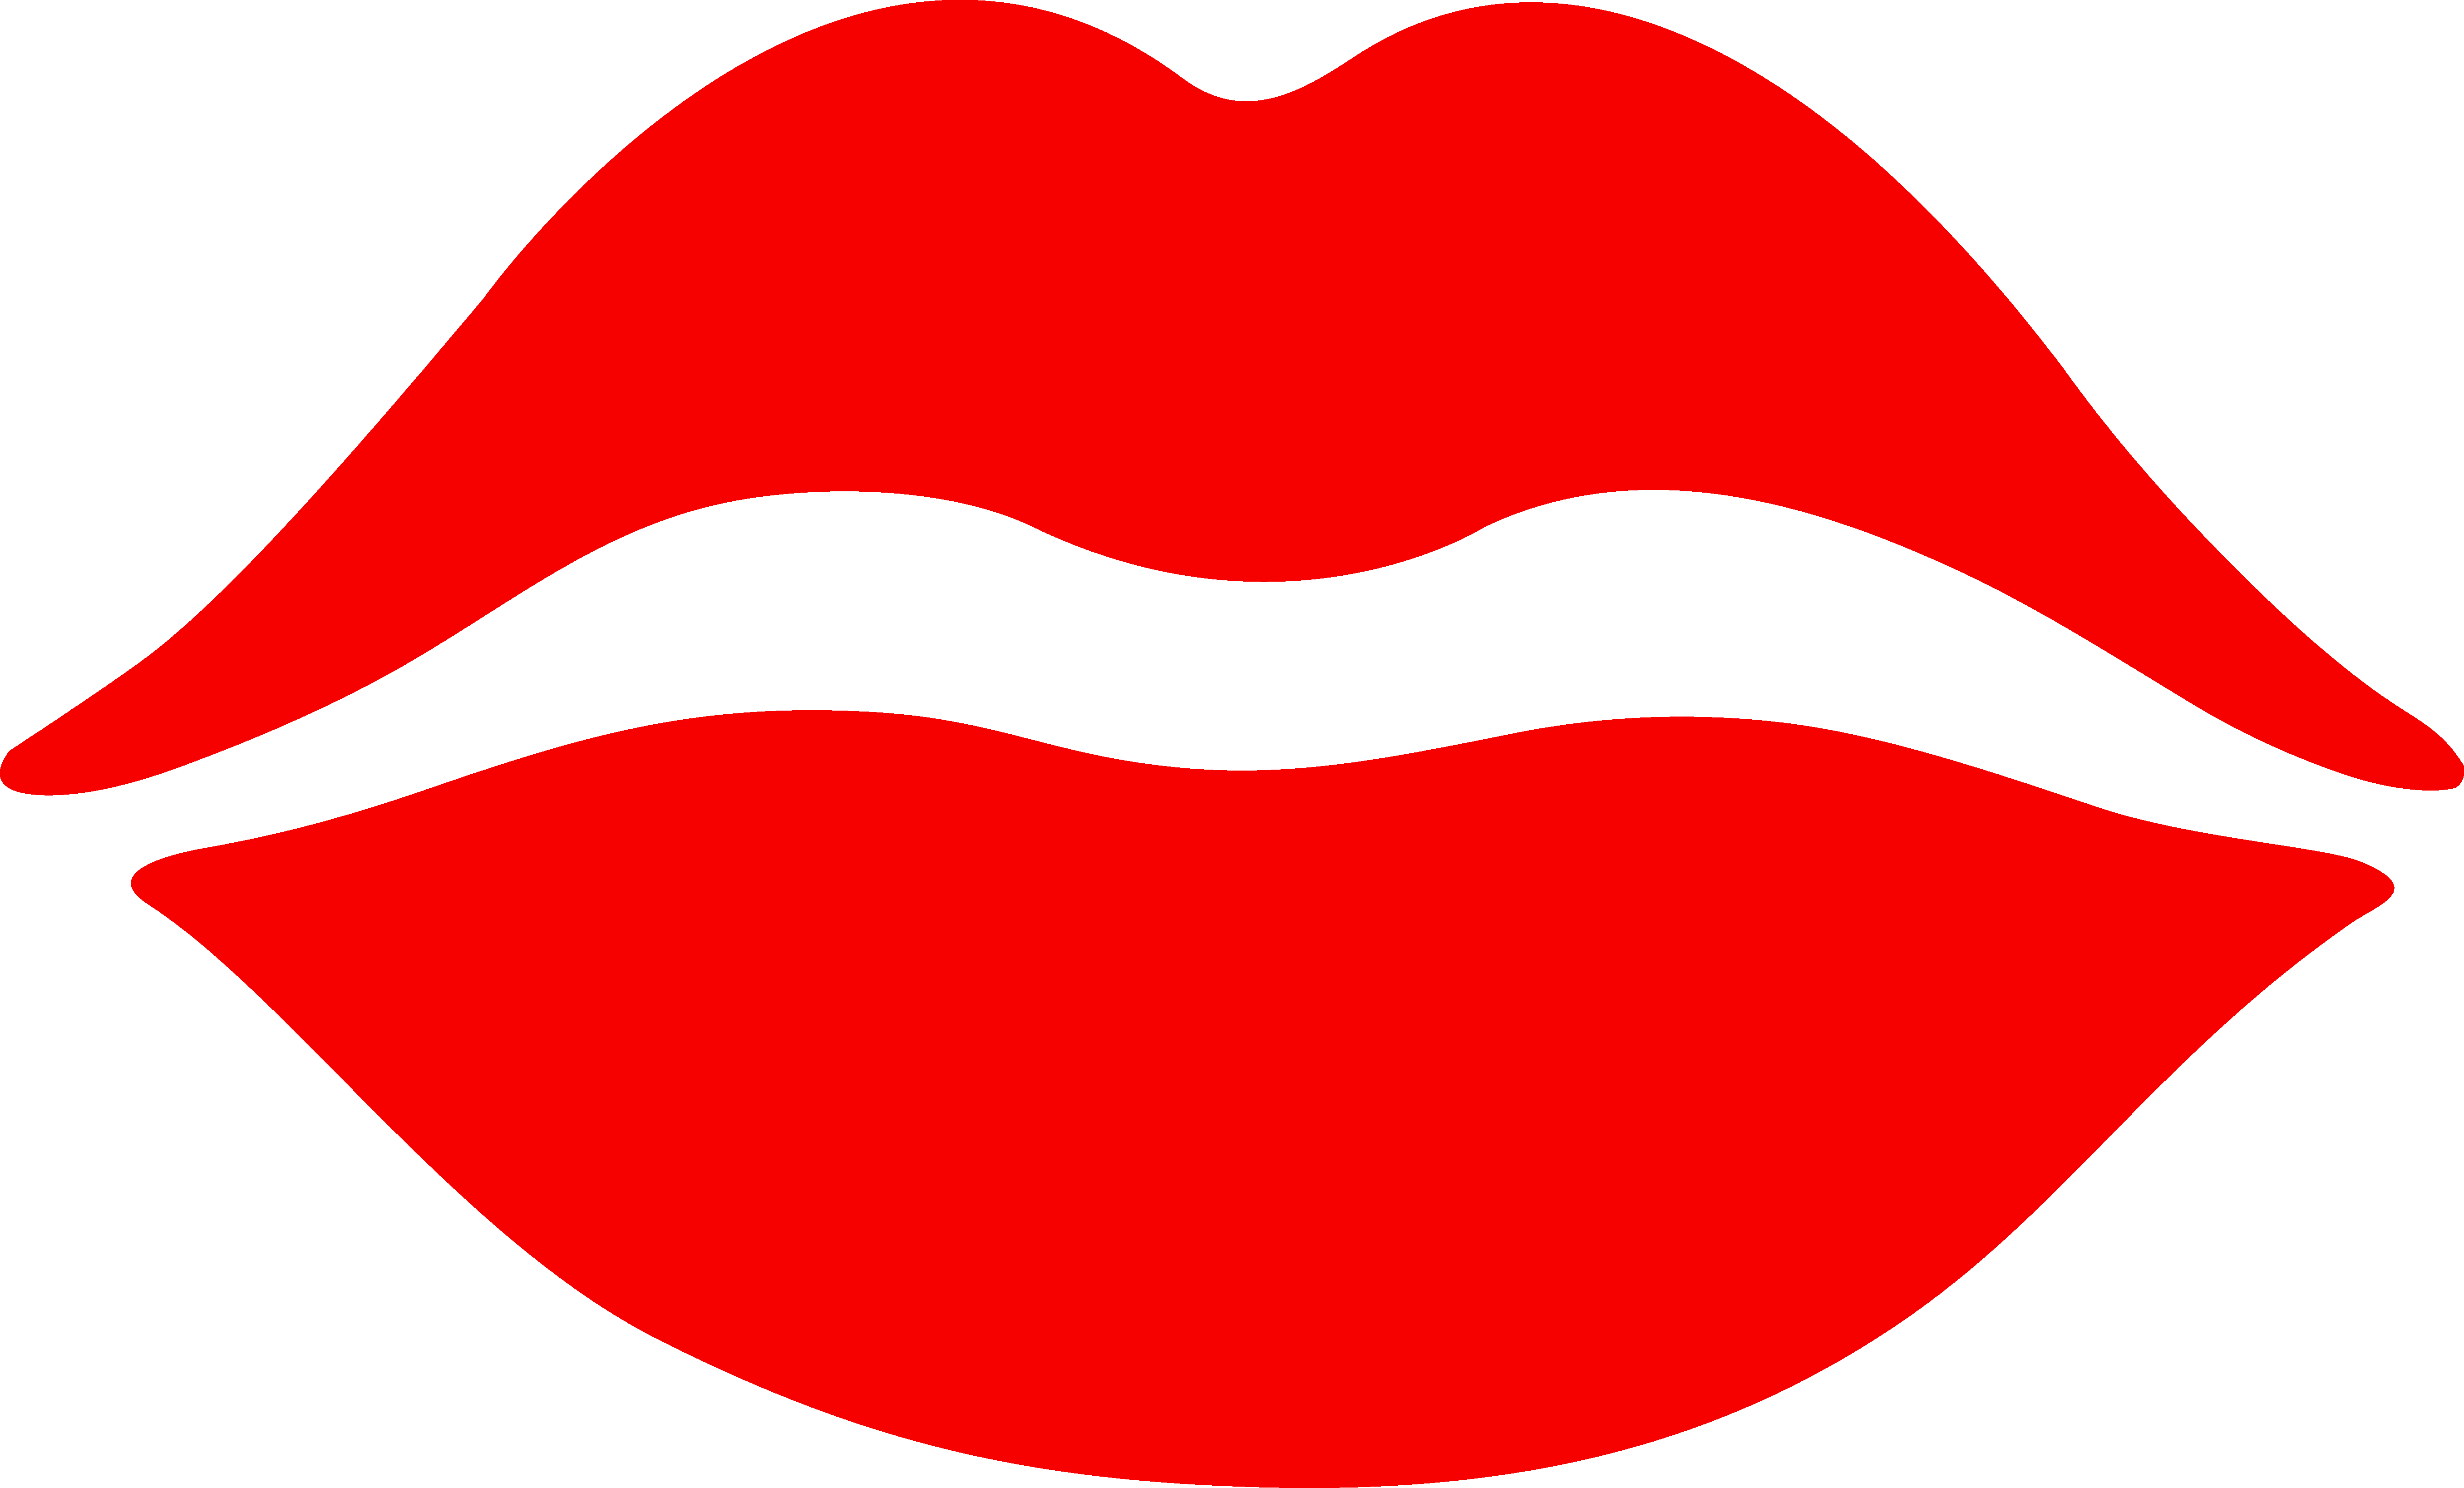 Simple red lips design. Kiss clipart glossy lip